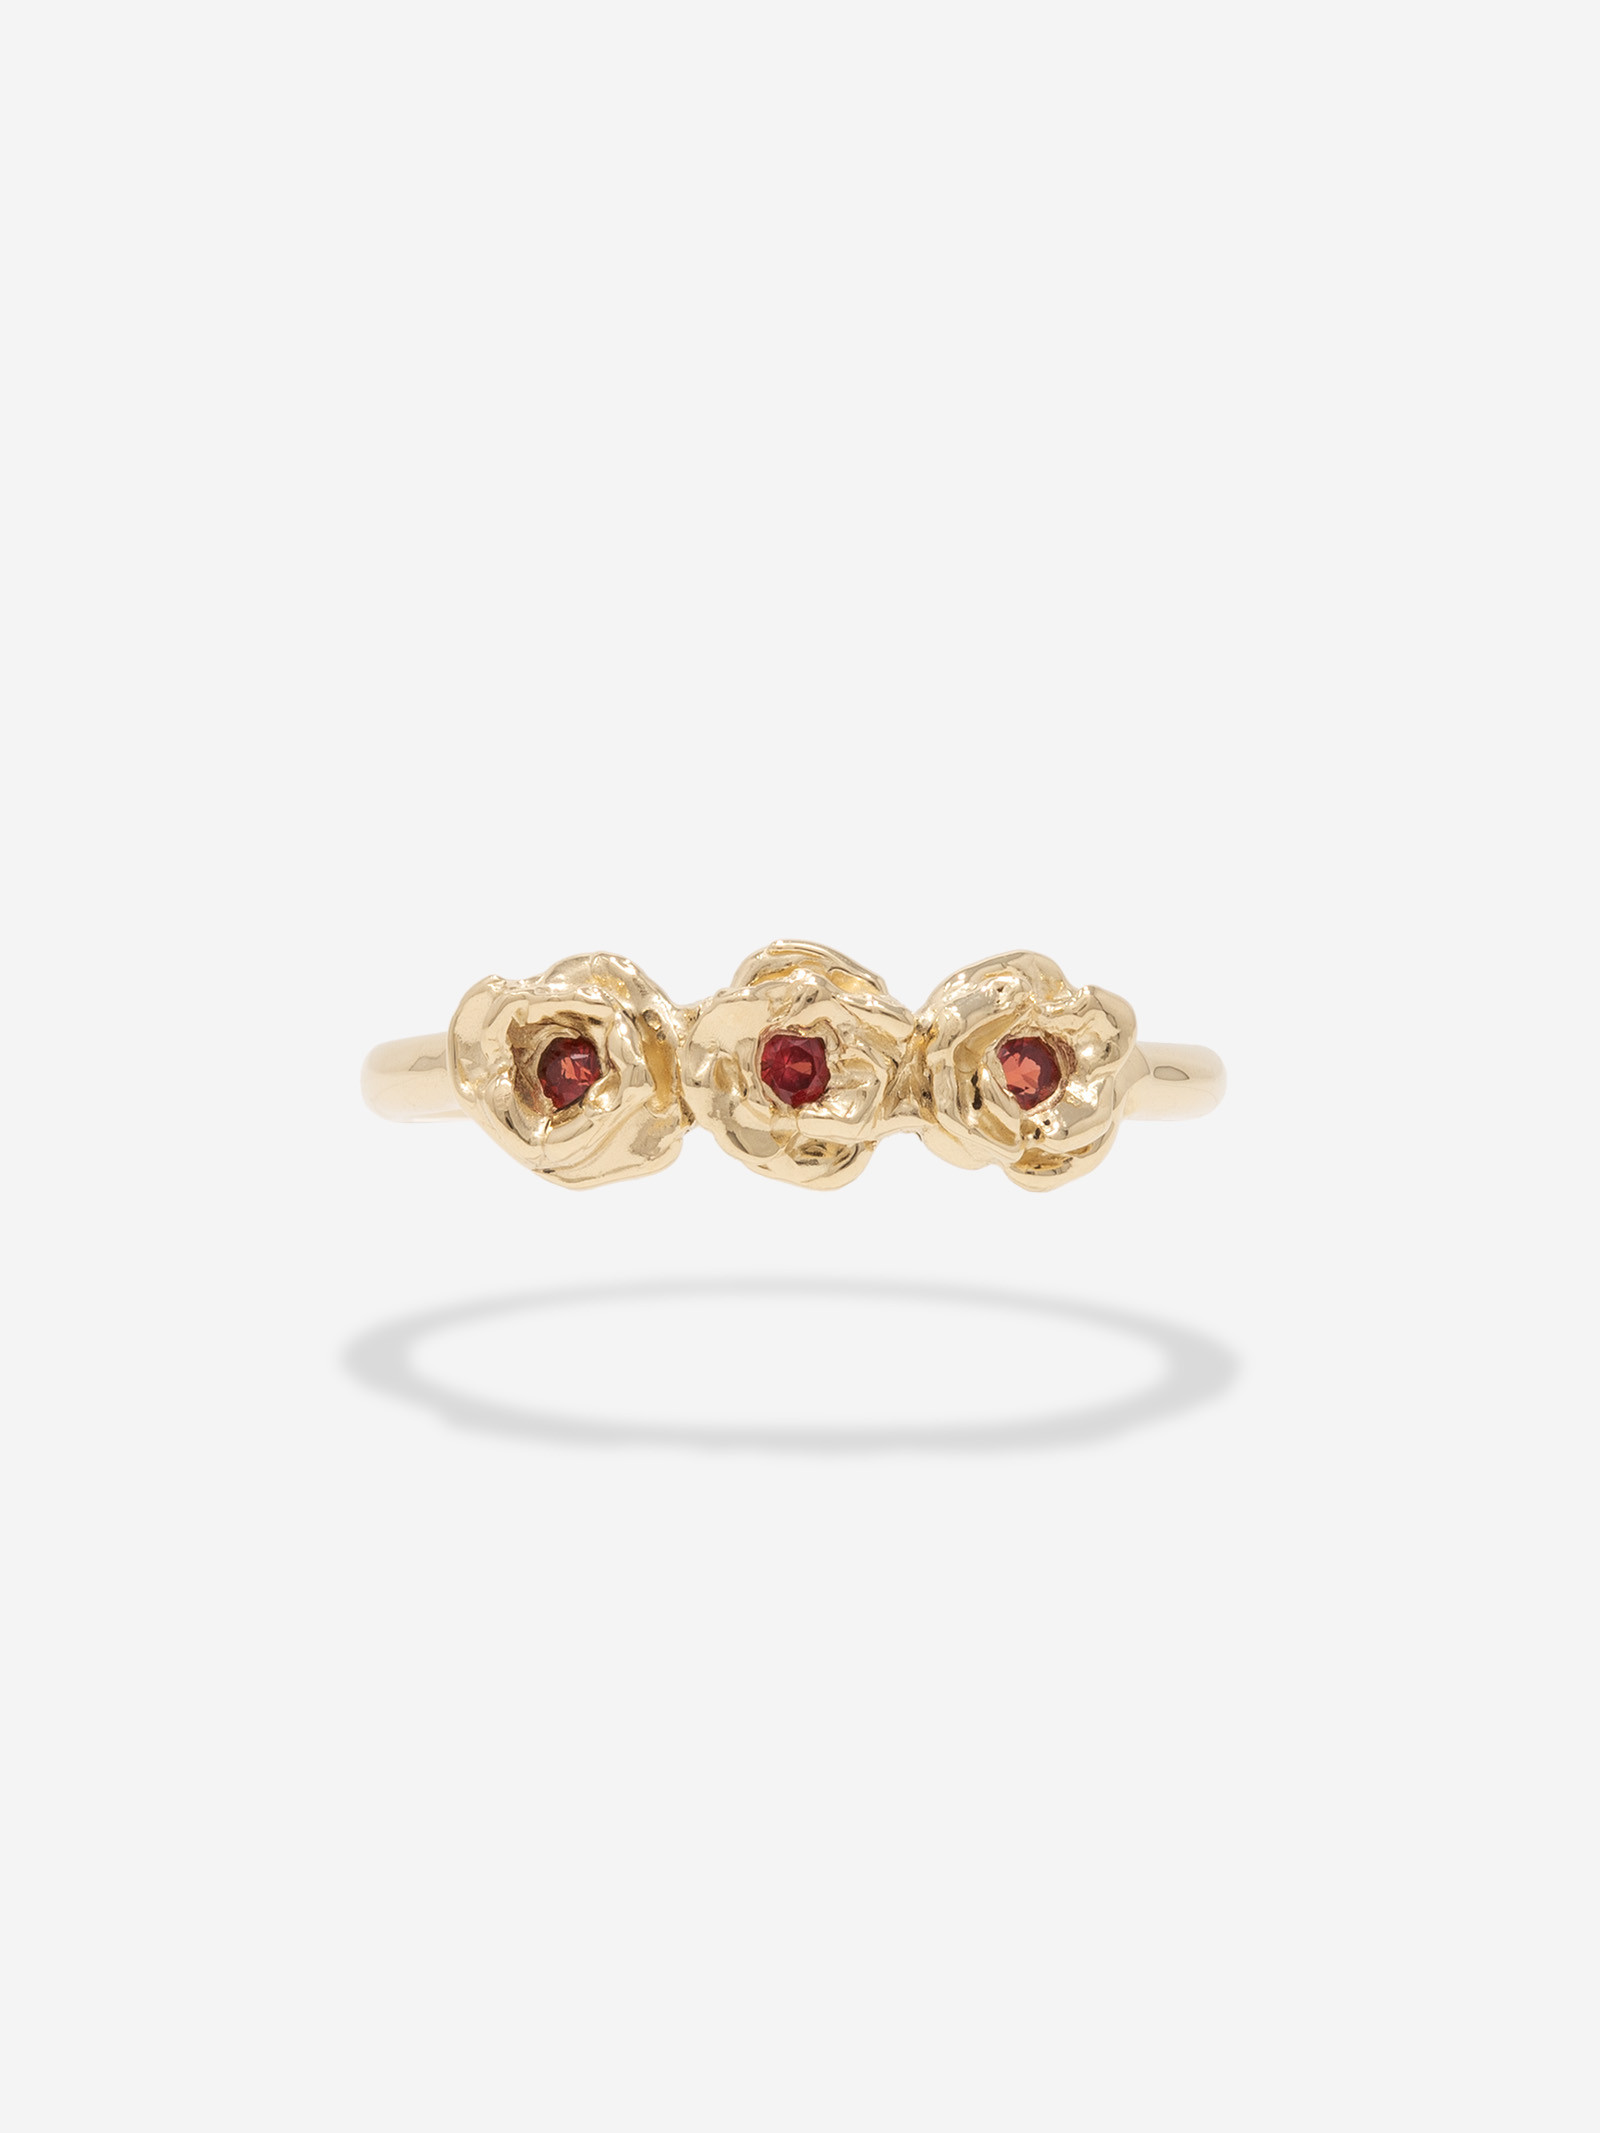 Three rose ring with red sapphire centers.